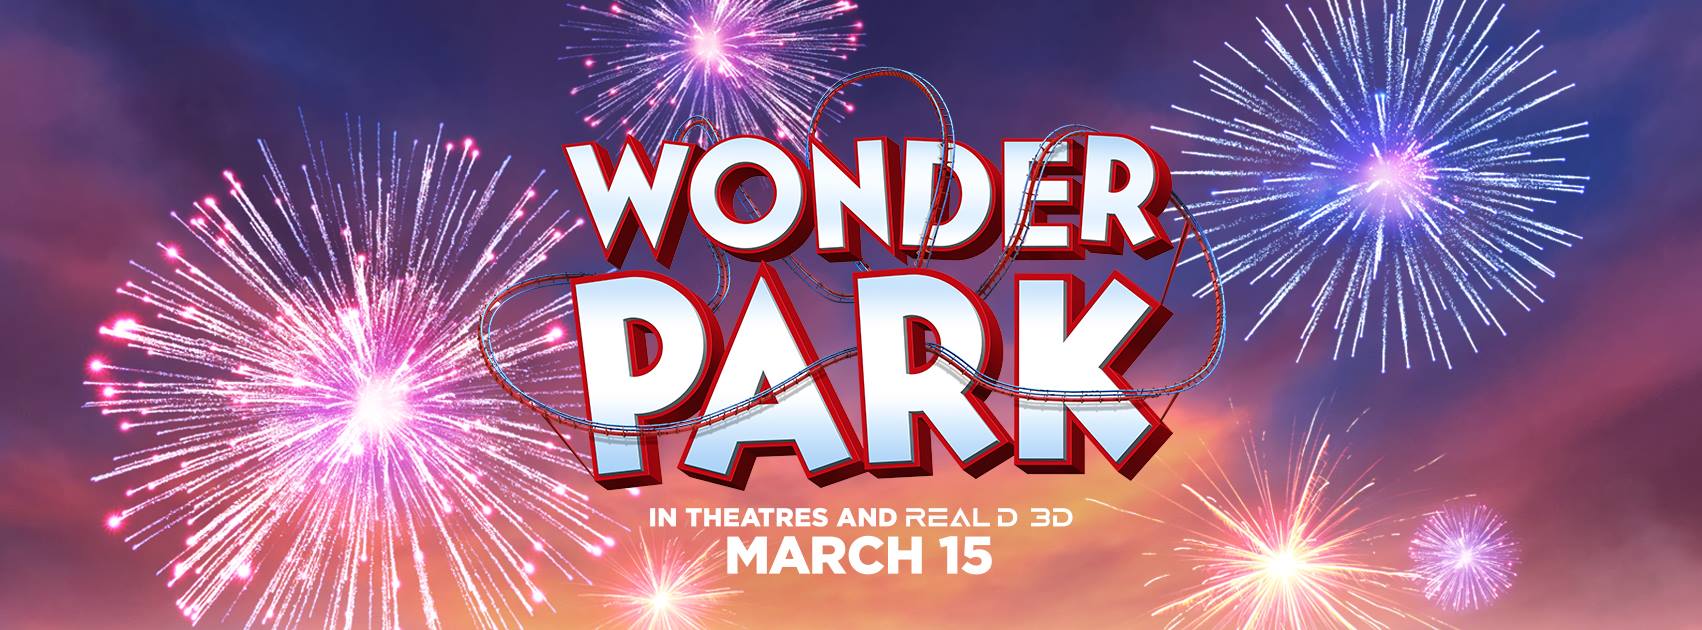 Watch the WONDER PARK Trailer, a fun family film in theaters on March 15! WONDER PARK is fun, creative, full of imagination, and must-see family film! The film encourages kids to be creative and use their imagination which is something I try to do as a mom.